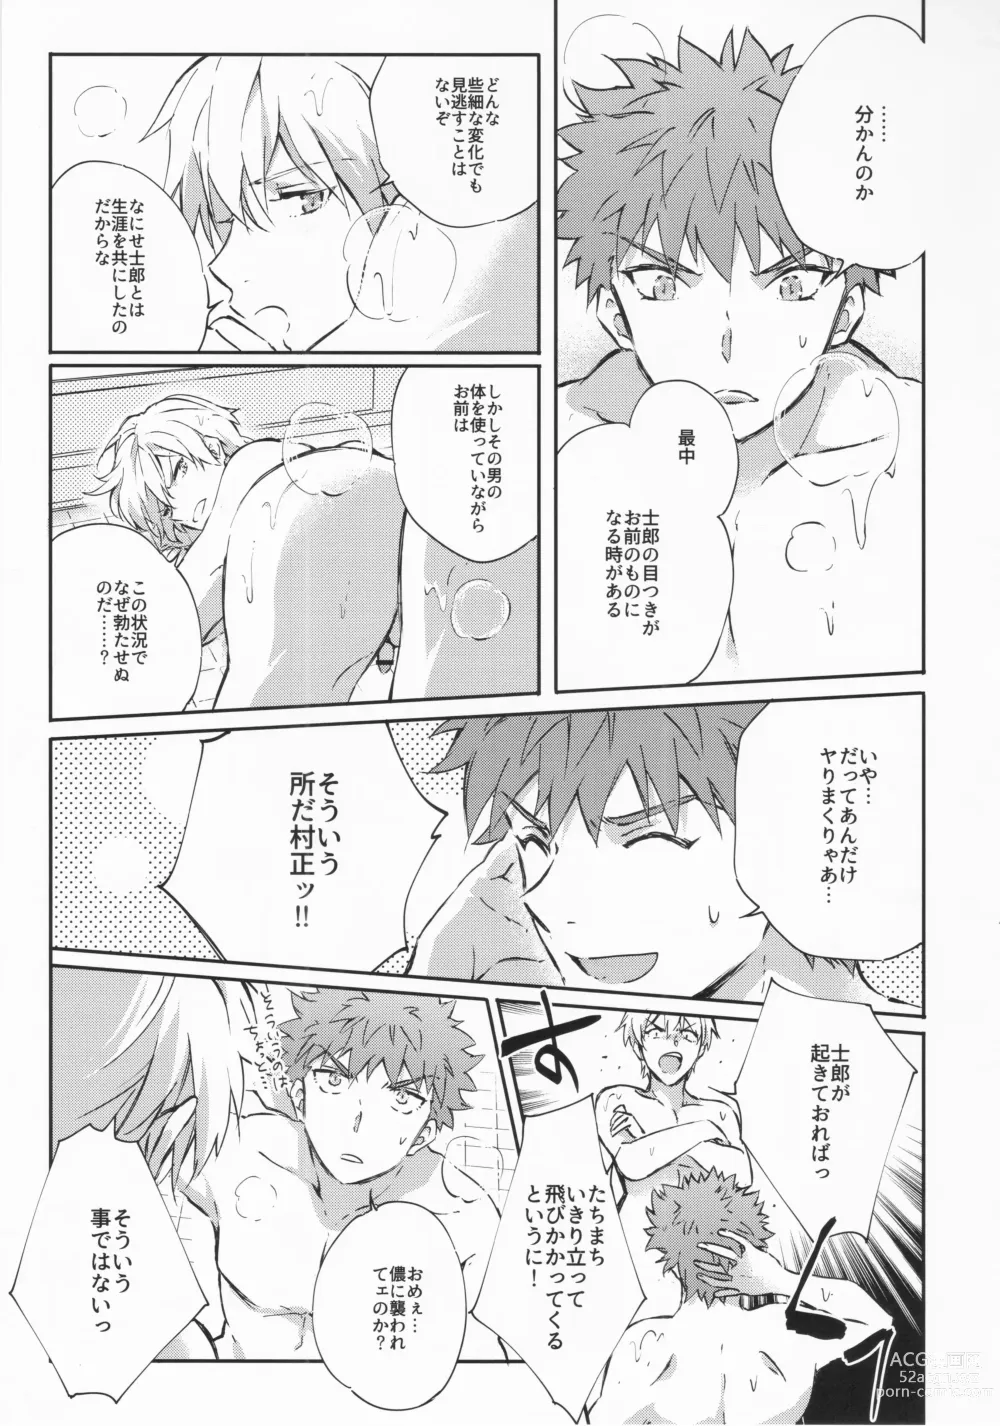 Page 42 of doujinshi STARDUST LOVESONG encore special story 1st After 7 Days